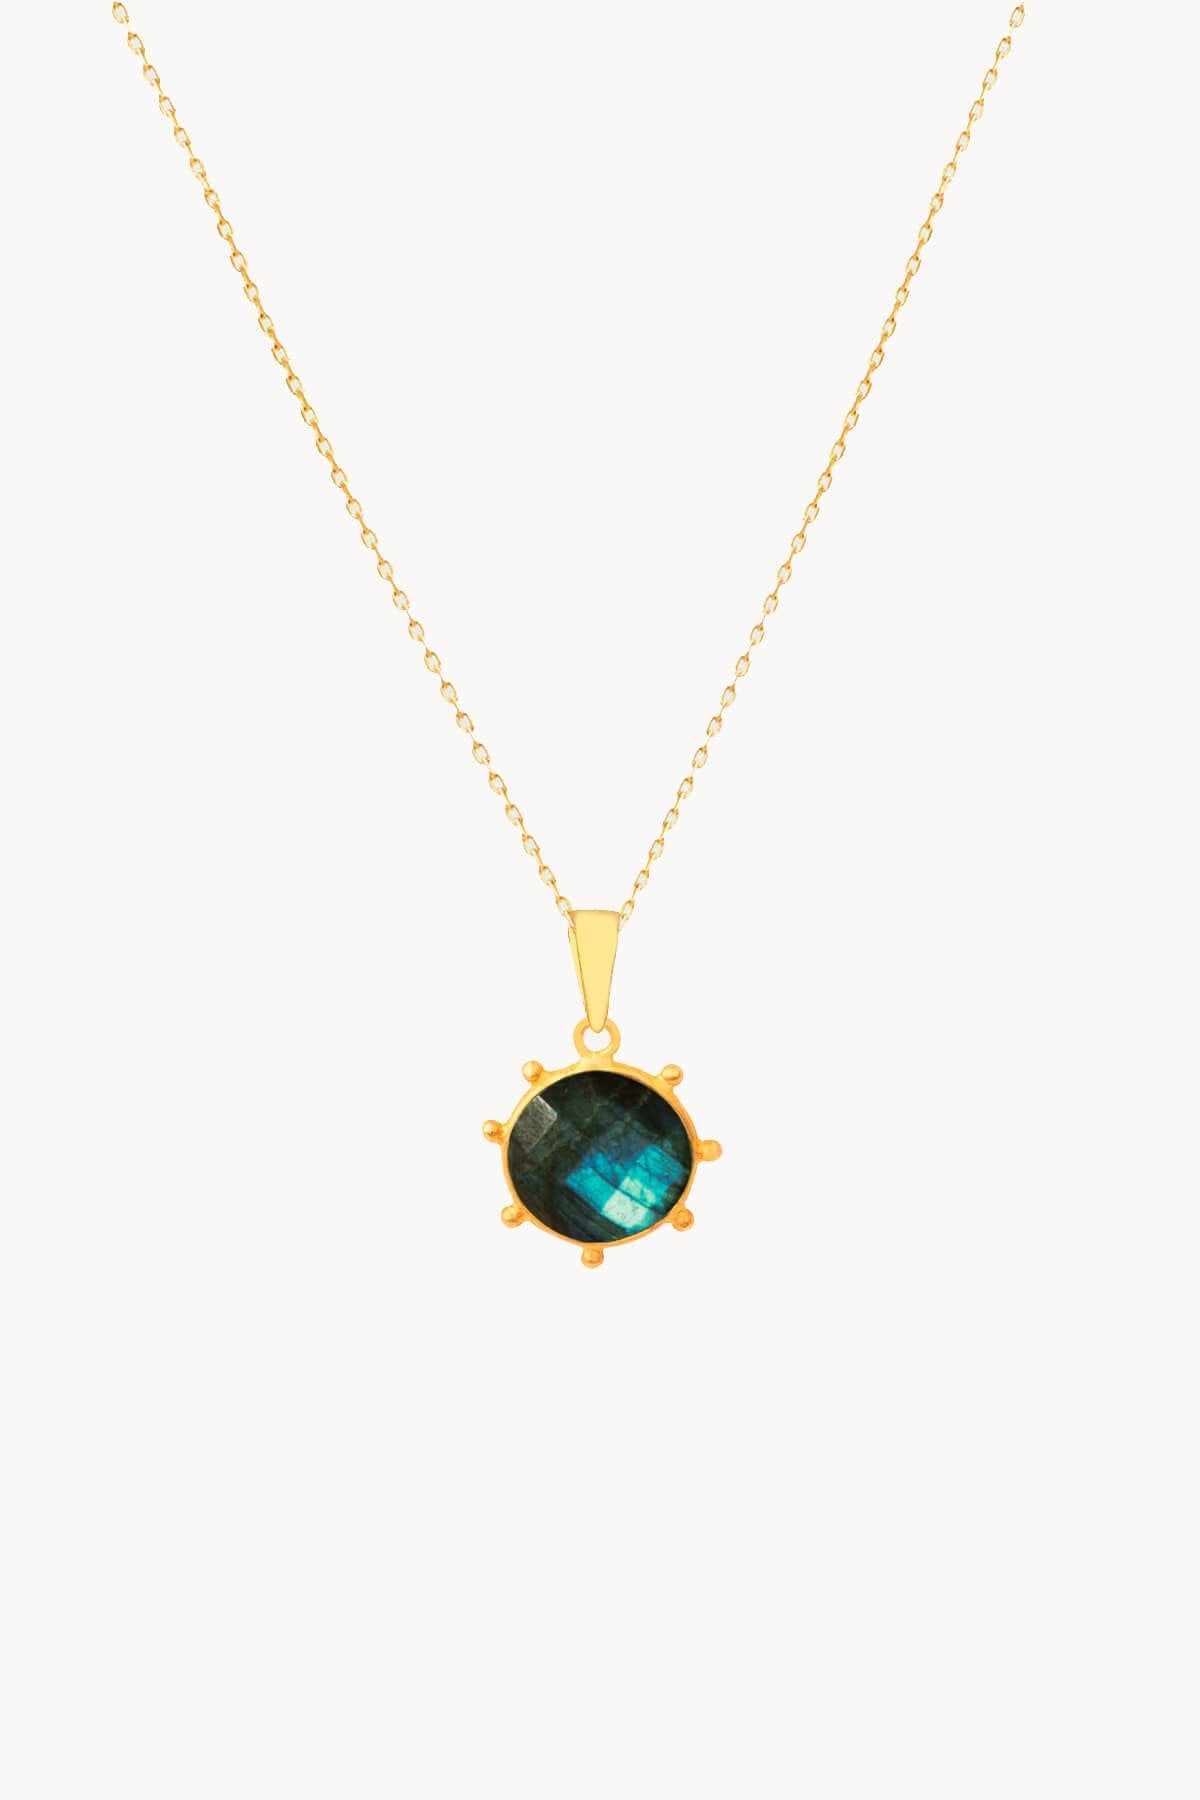 Natural Labradorite Stone Necklace 925 Sterling Silver Gold Plated